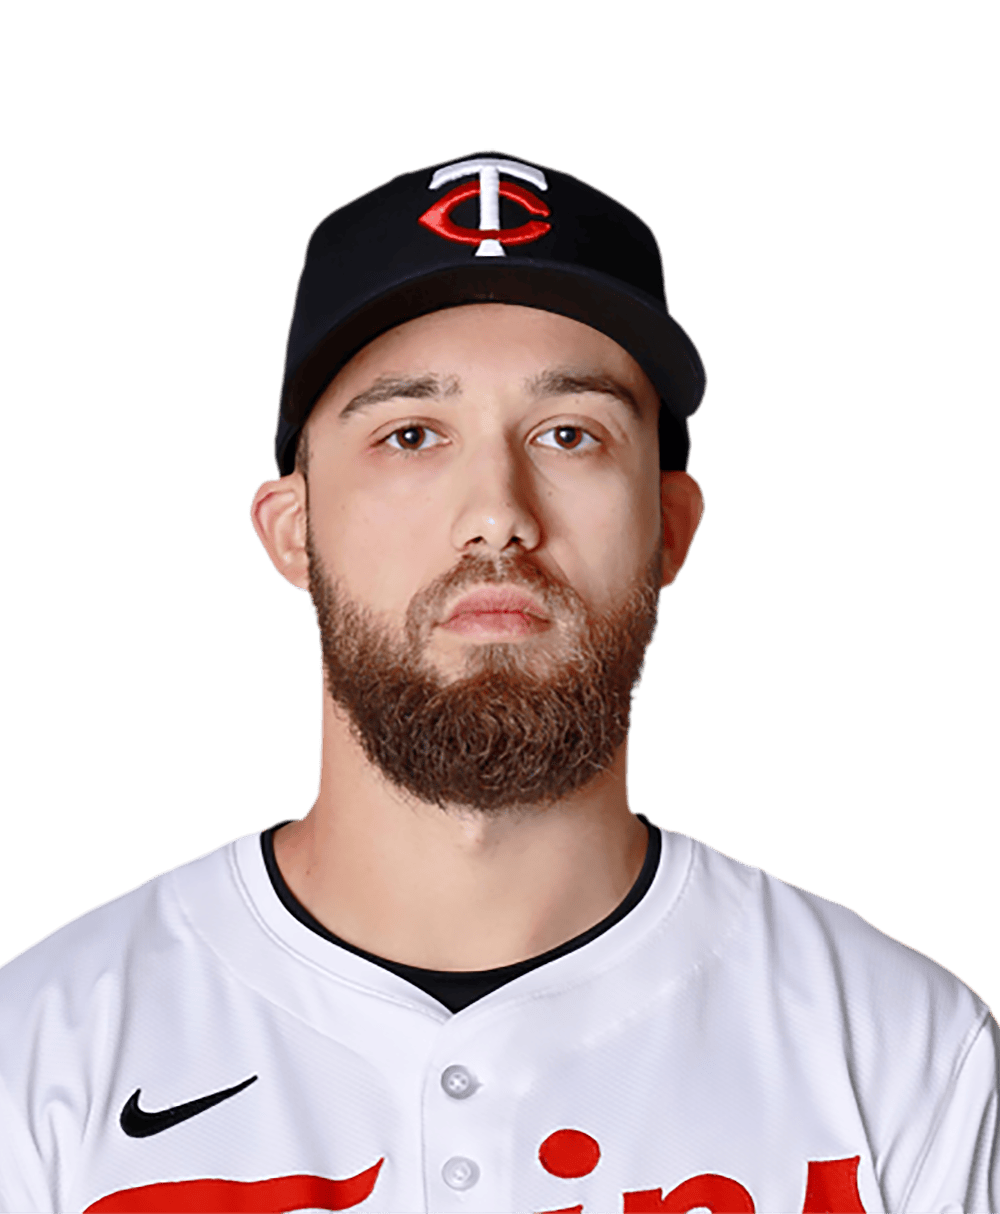 Twins place Joey Gallo on IL with left foot contusion, active Alex